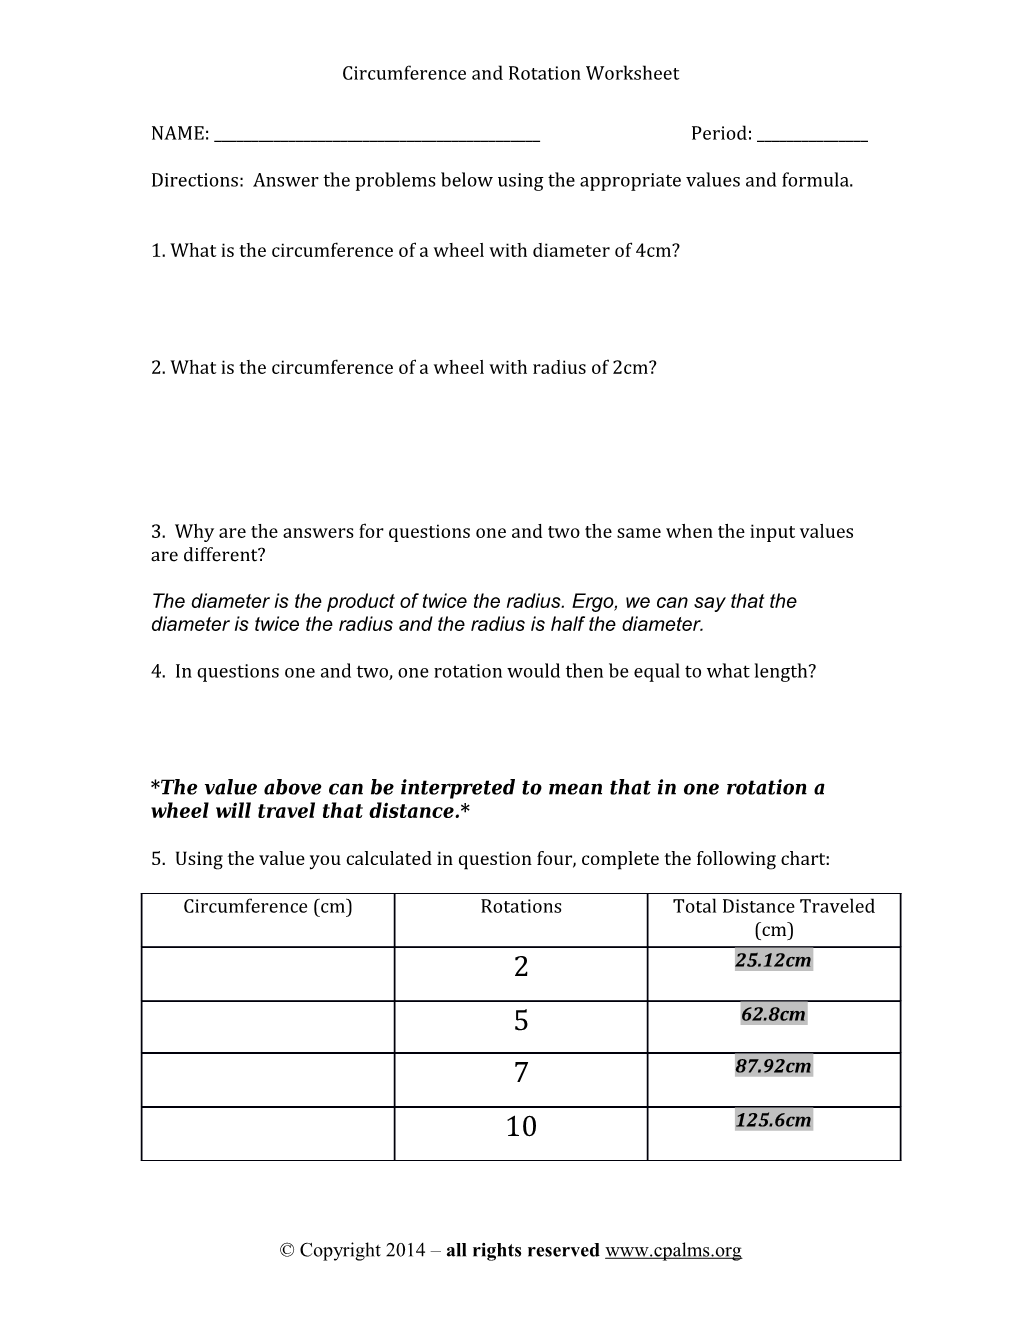 Circumference and Rotation Worksheet